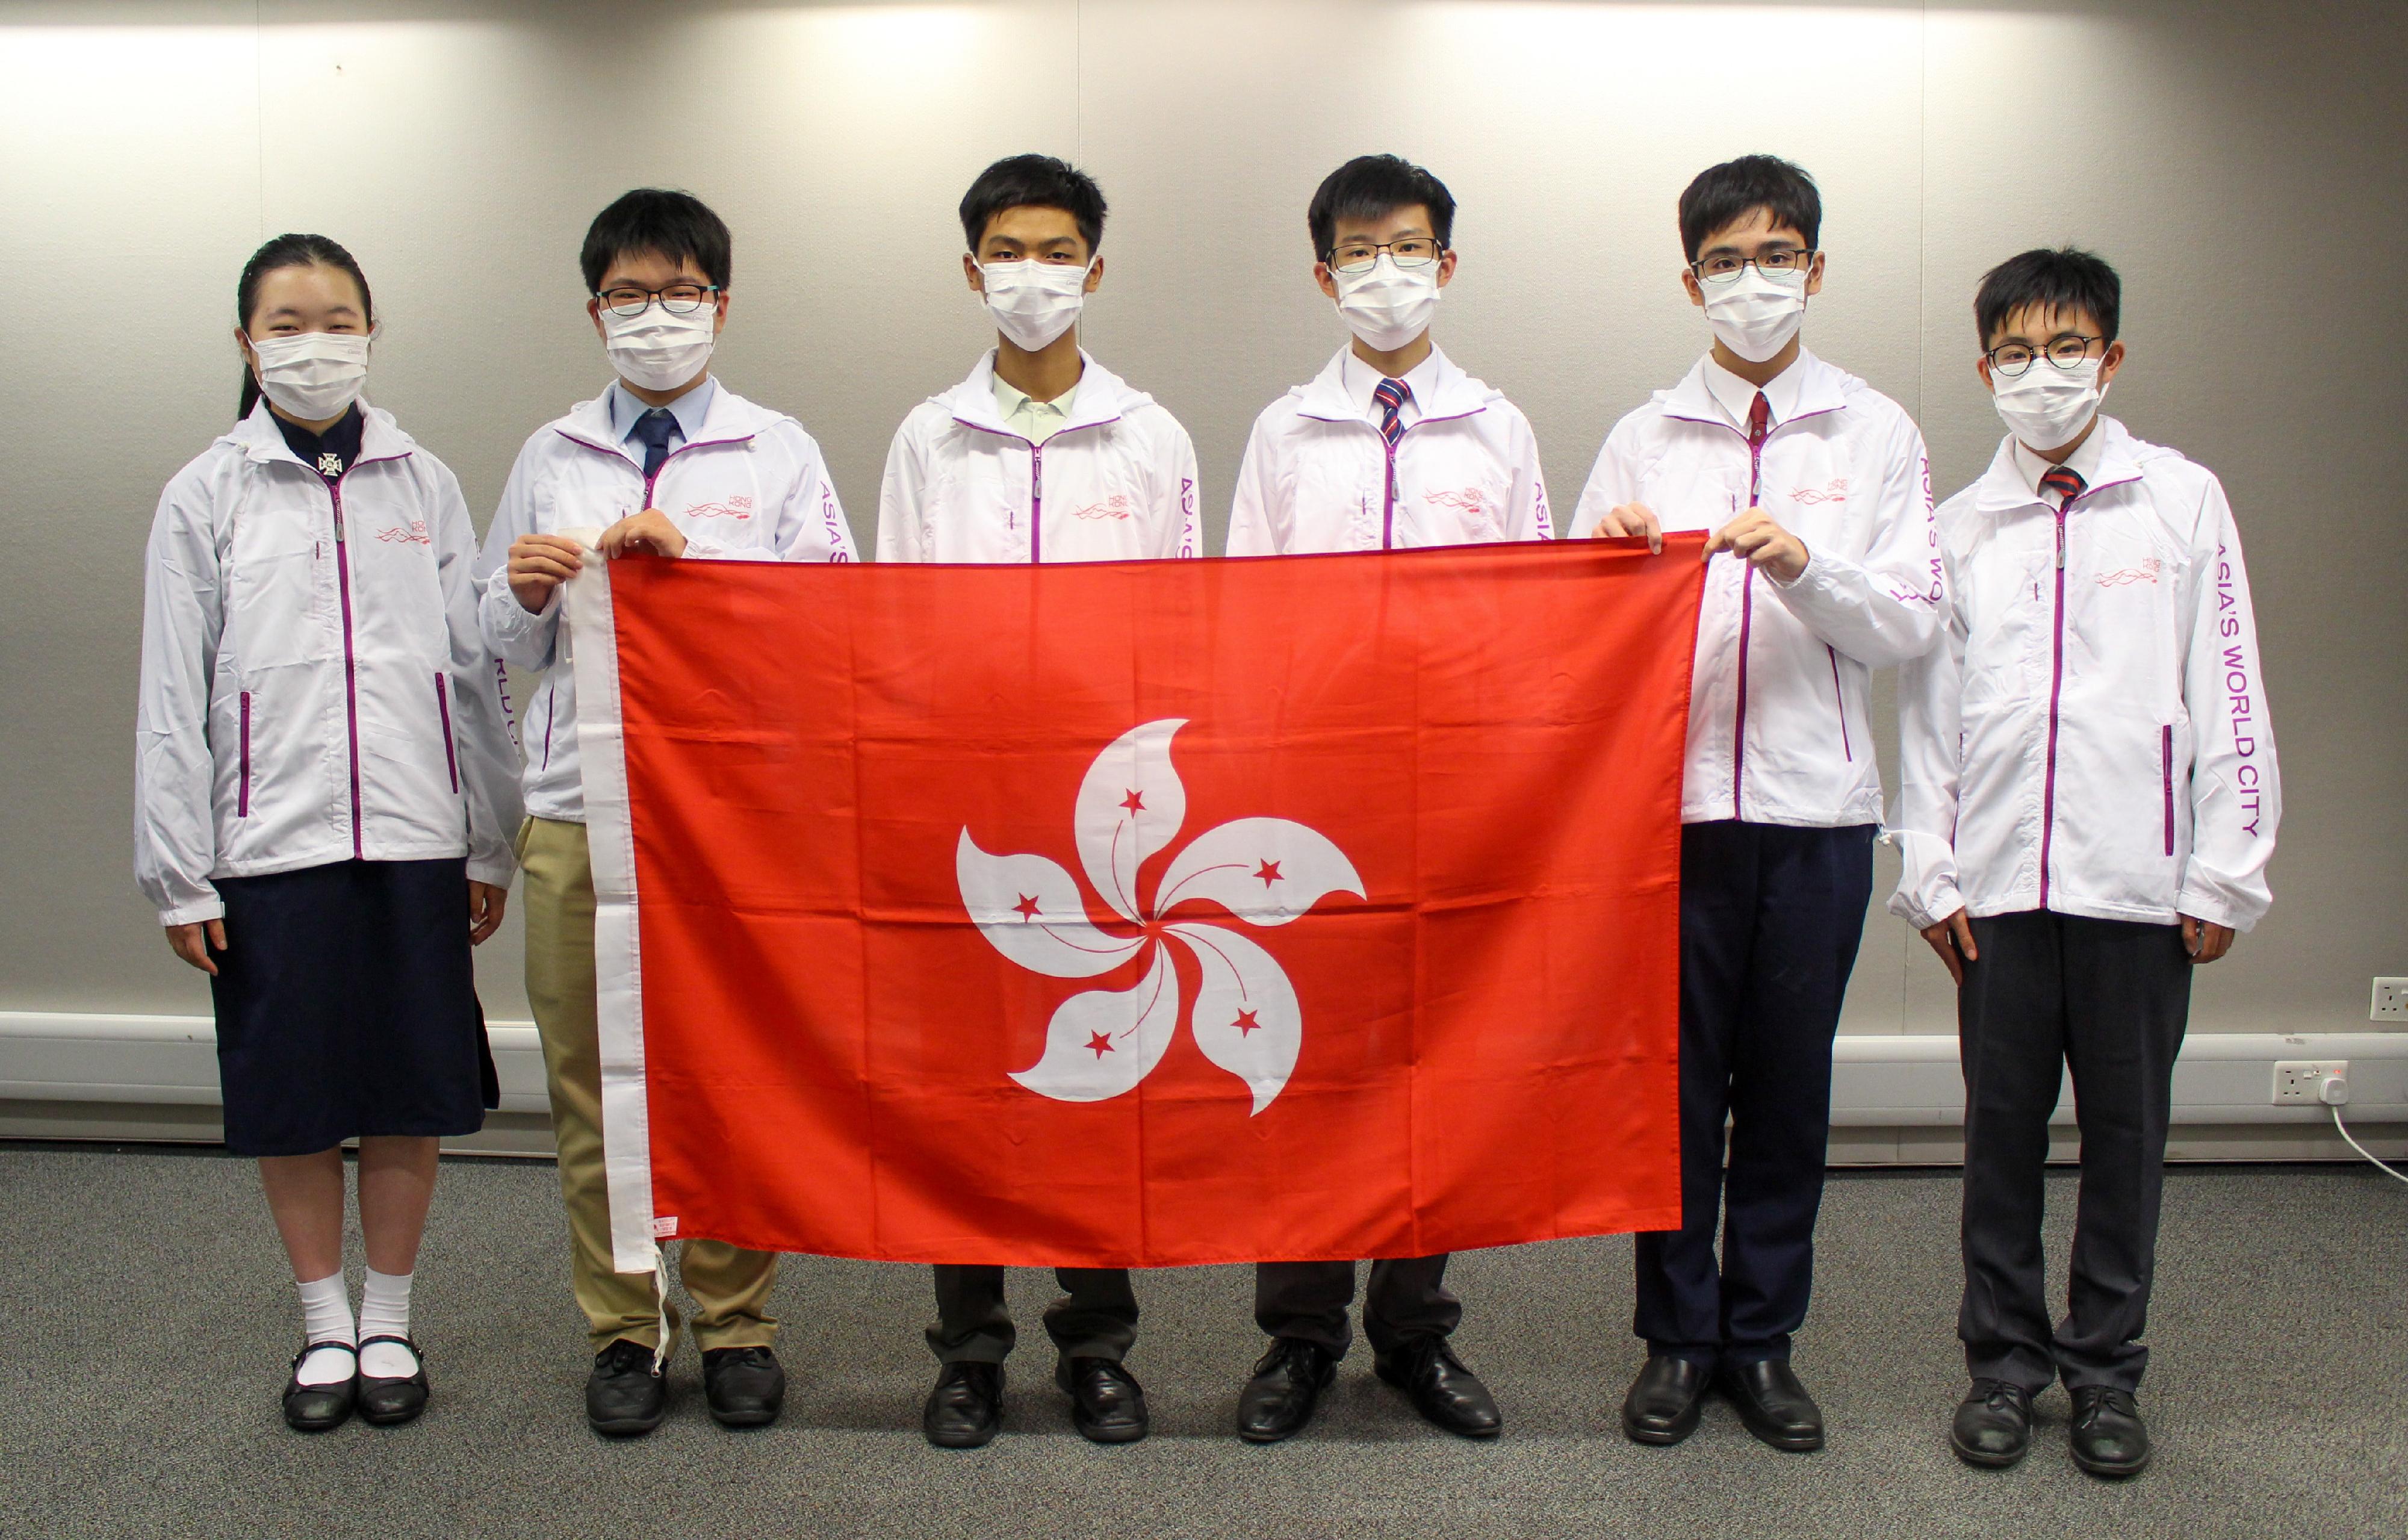 Six students representing Hong Kong achieved remarkable results in the 18th International Junior Science Olympiad, which was held online. They are (from left) Suen Ming-to, Kyan Cheung, Wong Chun-lam, Mai Tai-sheuk, Ng Shuk-hei and Choi Ho-long.